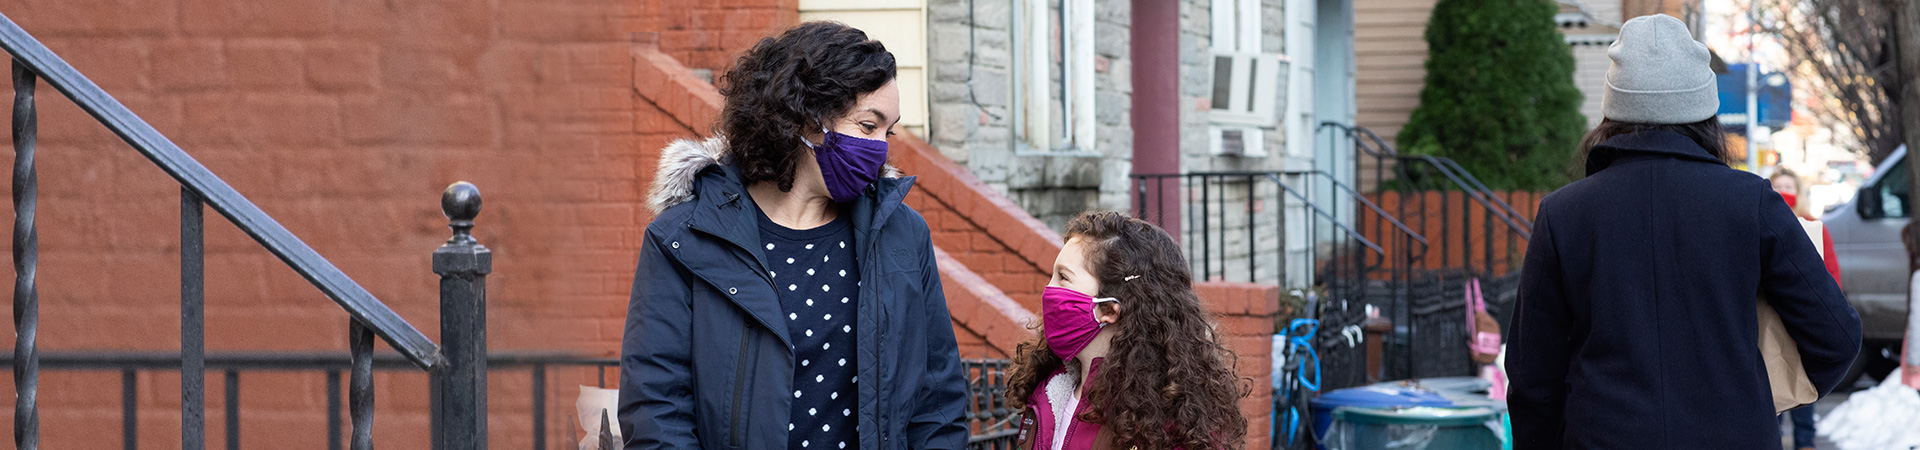  a mom and her daughter wearing winter clothes and face masks 